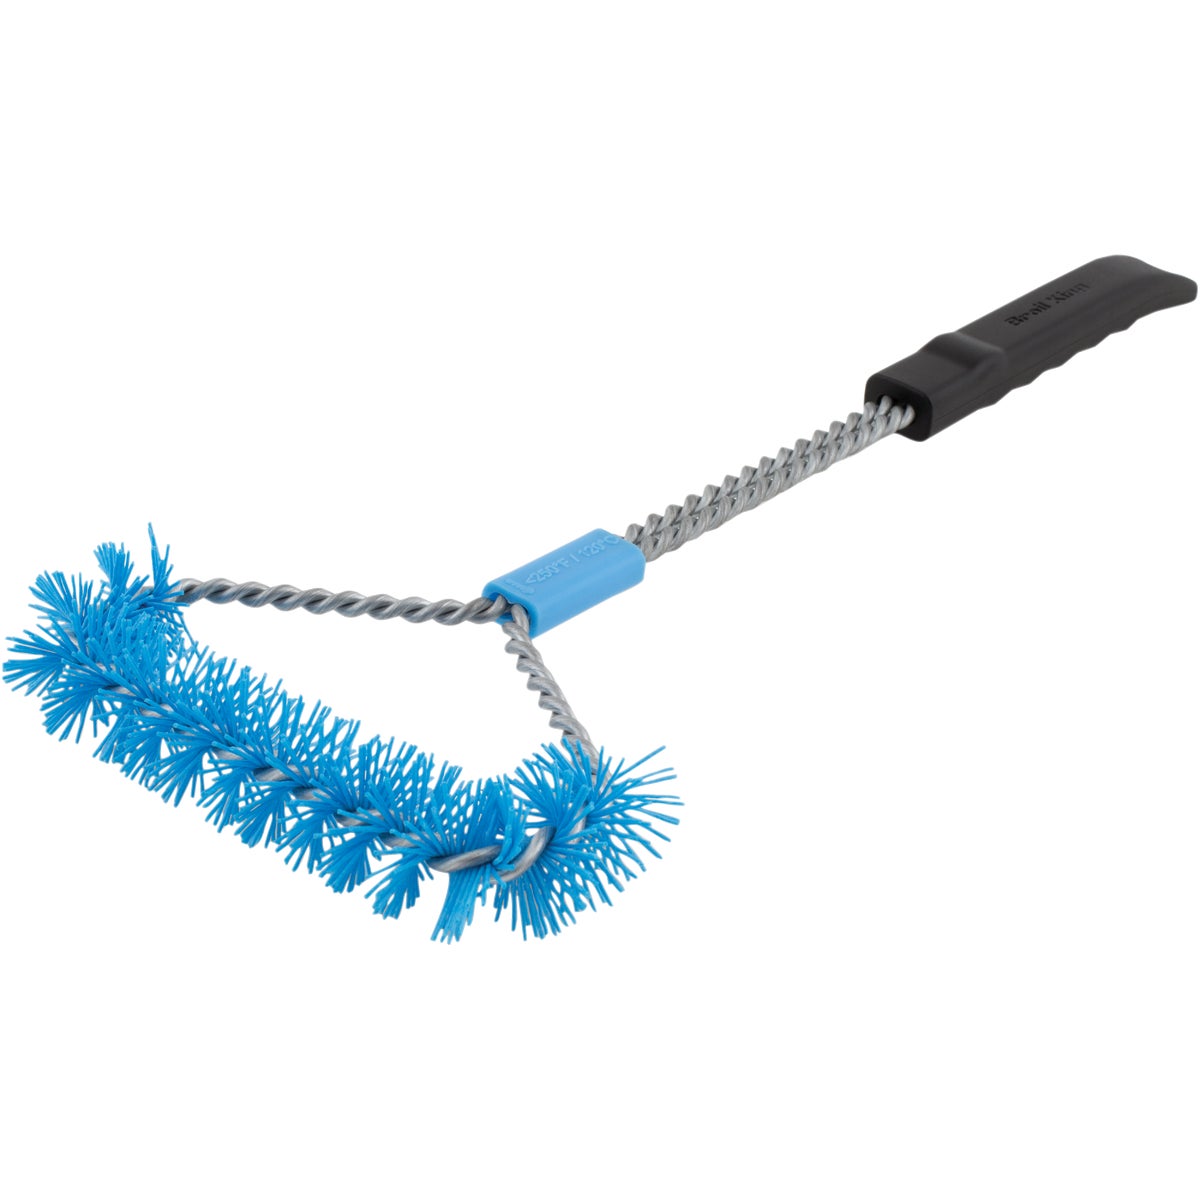 Broil King 18.11 In. Twisted Nylon Tri-Head Grill Cleaning Brush